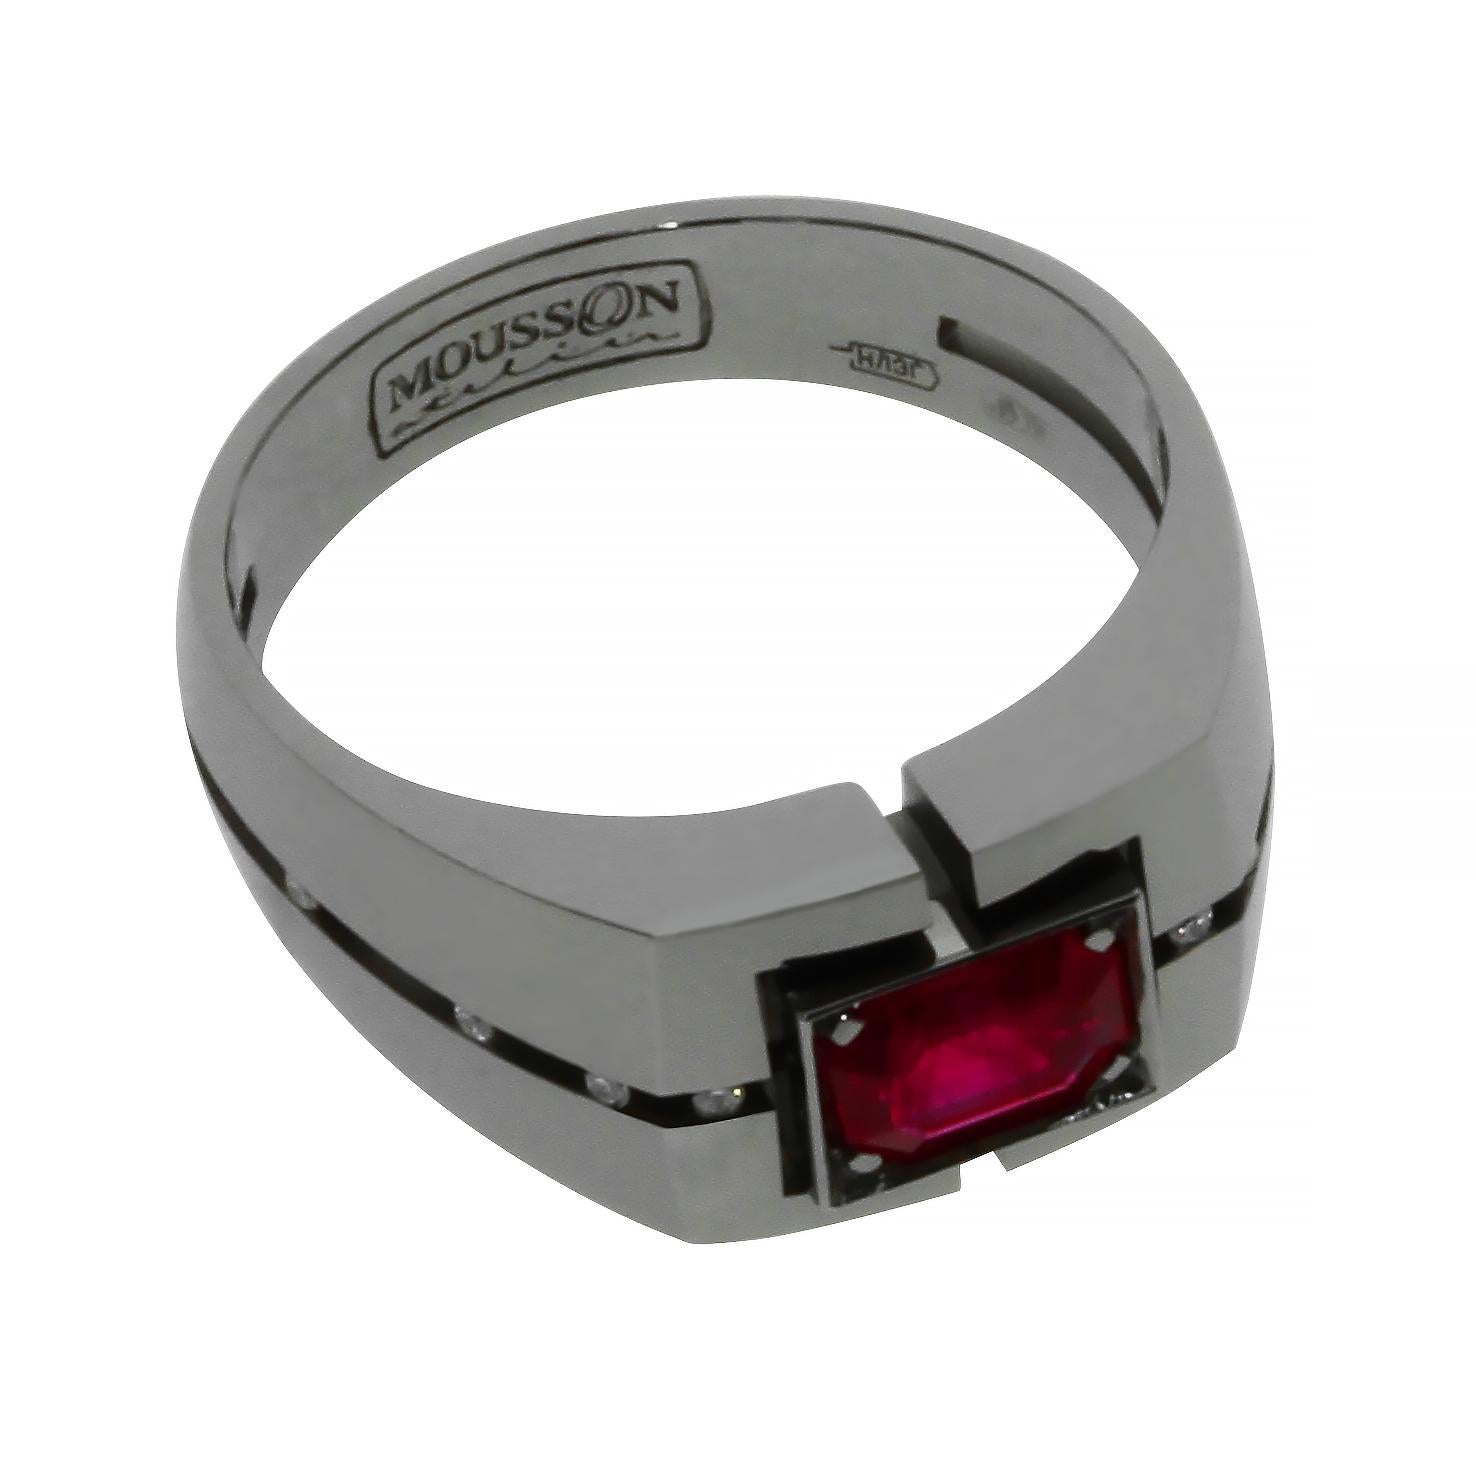 Diamond Ruby 18 Karat Black Gold Male Ring

Red and Black... Passion and Power blended together in this rugged design.
Diamonds are set with flying setting technique.
Please request a video link to check them out. 

Accompanied with Cufflinks